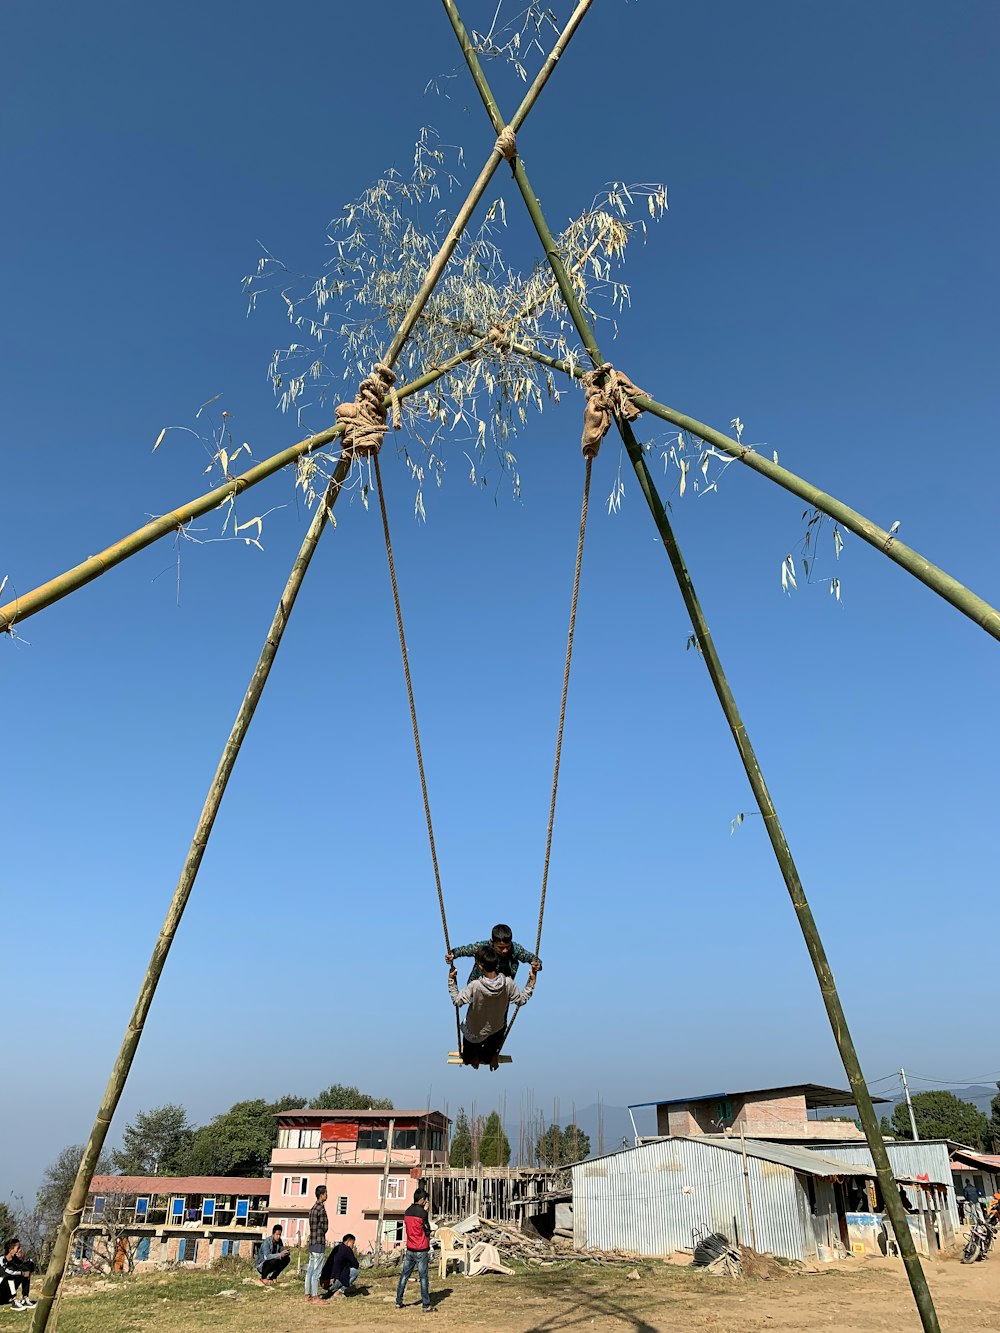 a man on a swing in the middle of a field